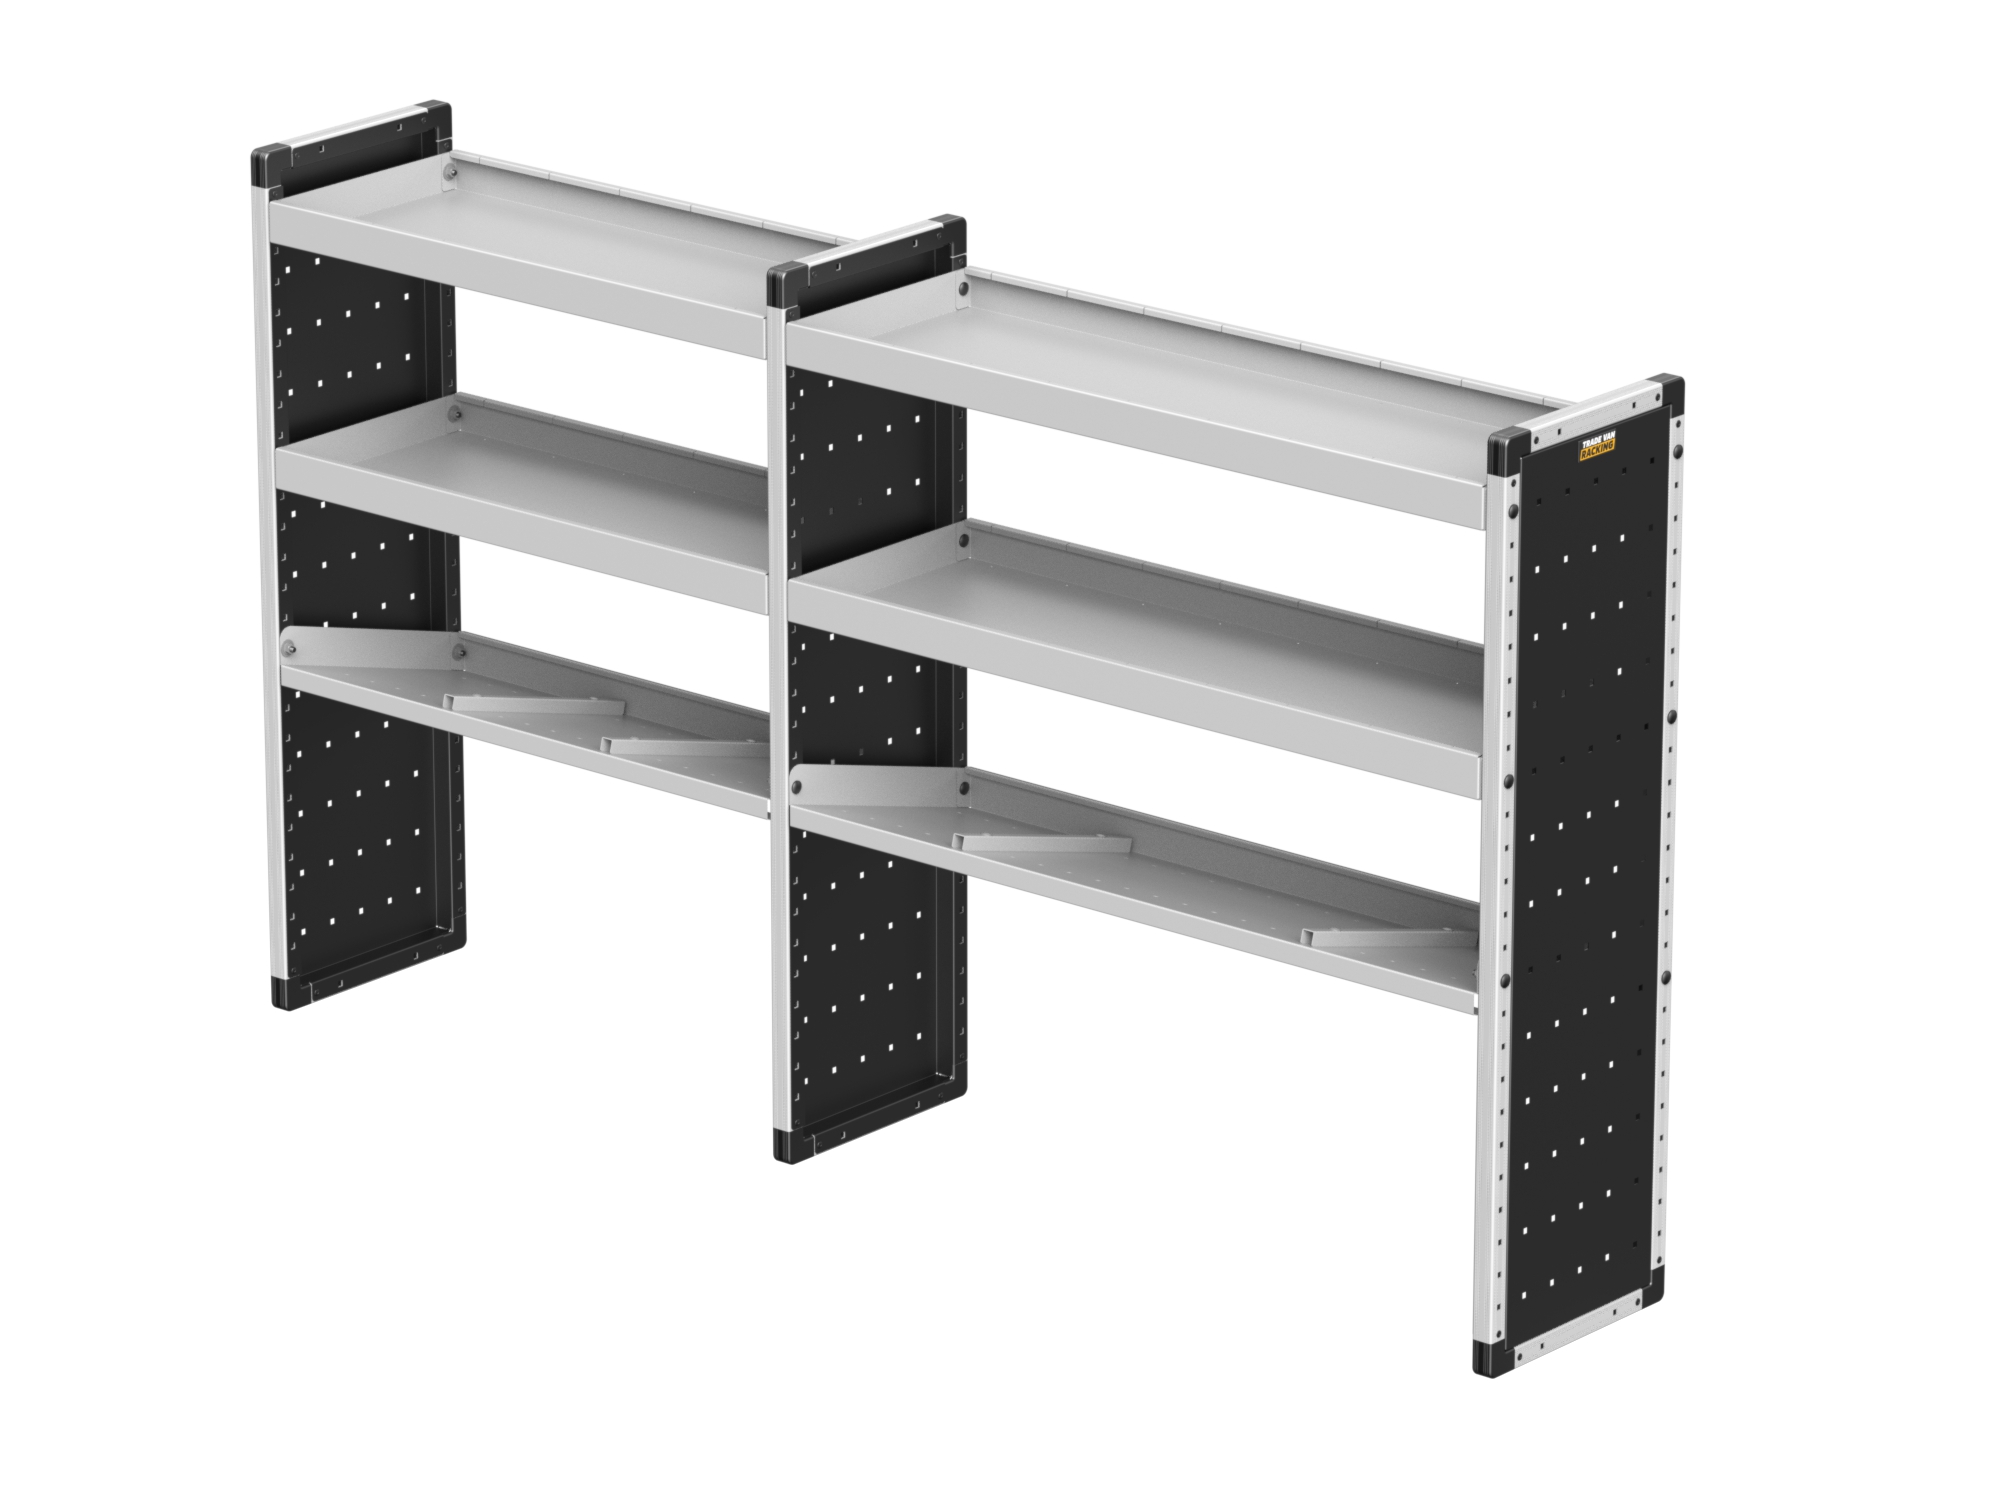 Trade Van Racking - Double Unit - 2 straight & 1 angled per bay - TVR-DBL-011